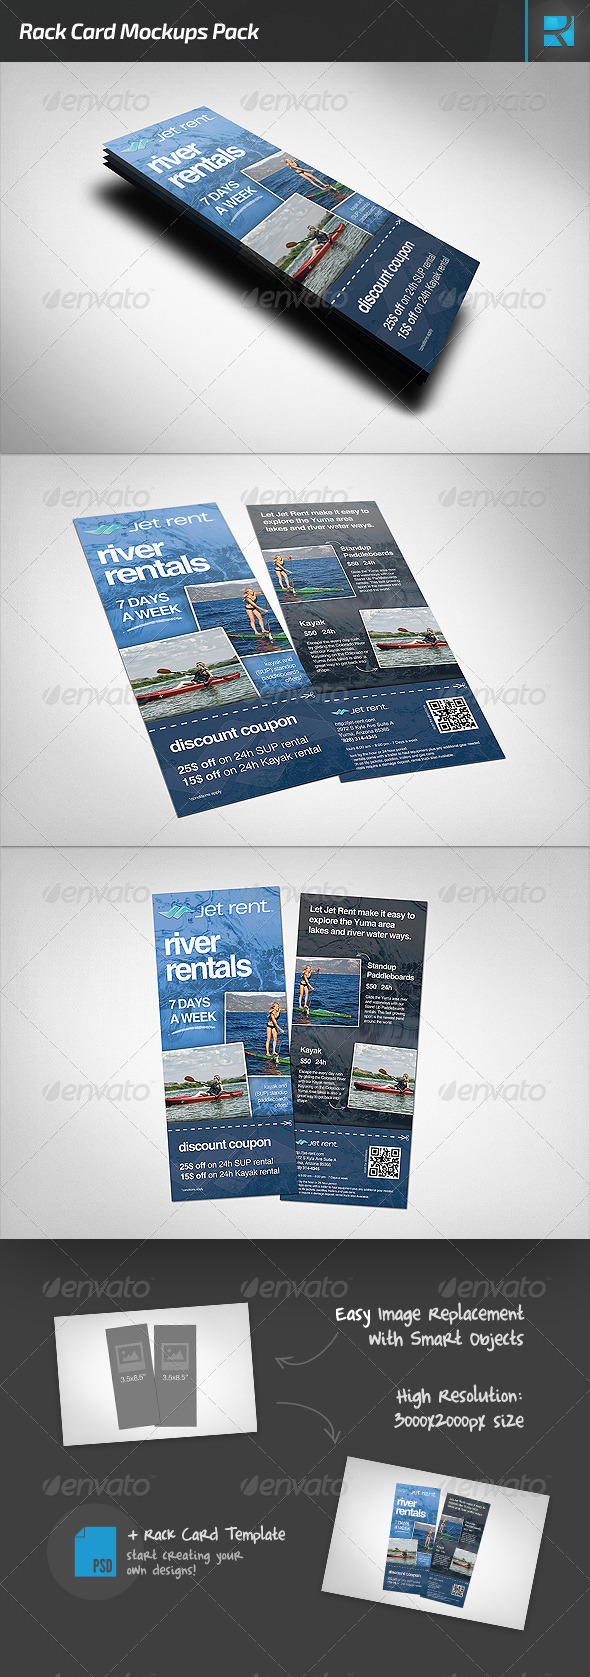 Download Rack Card Mockups Pack By Rafaeloliveira2 Graphicriver